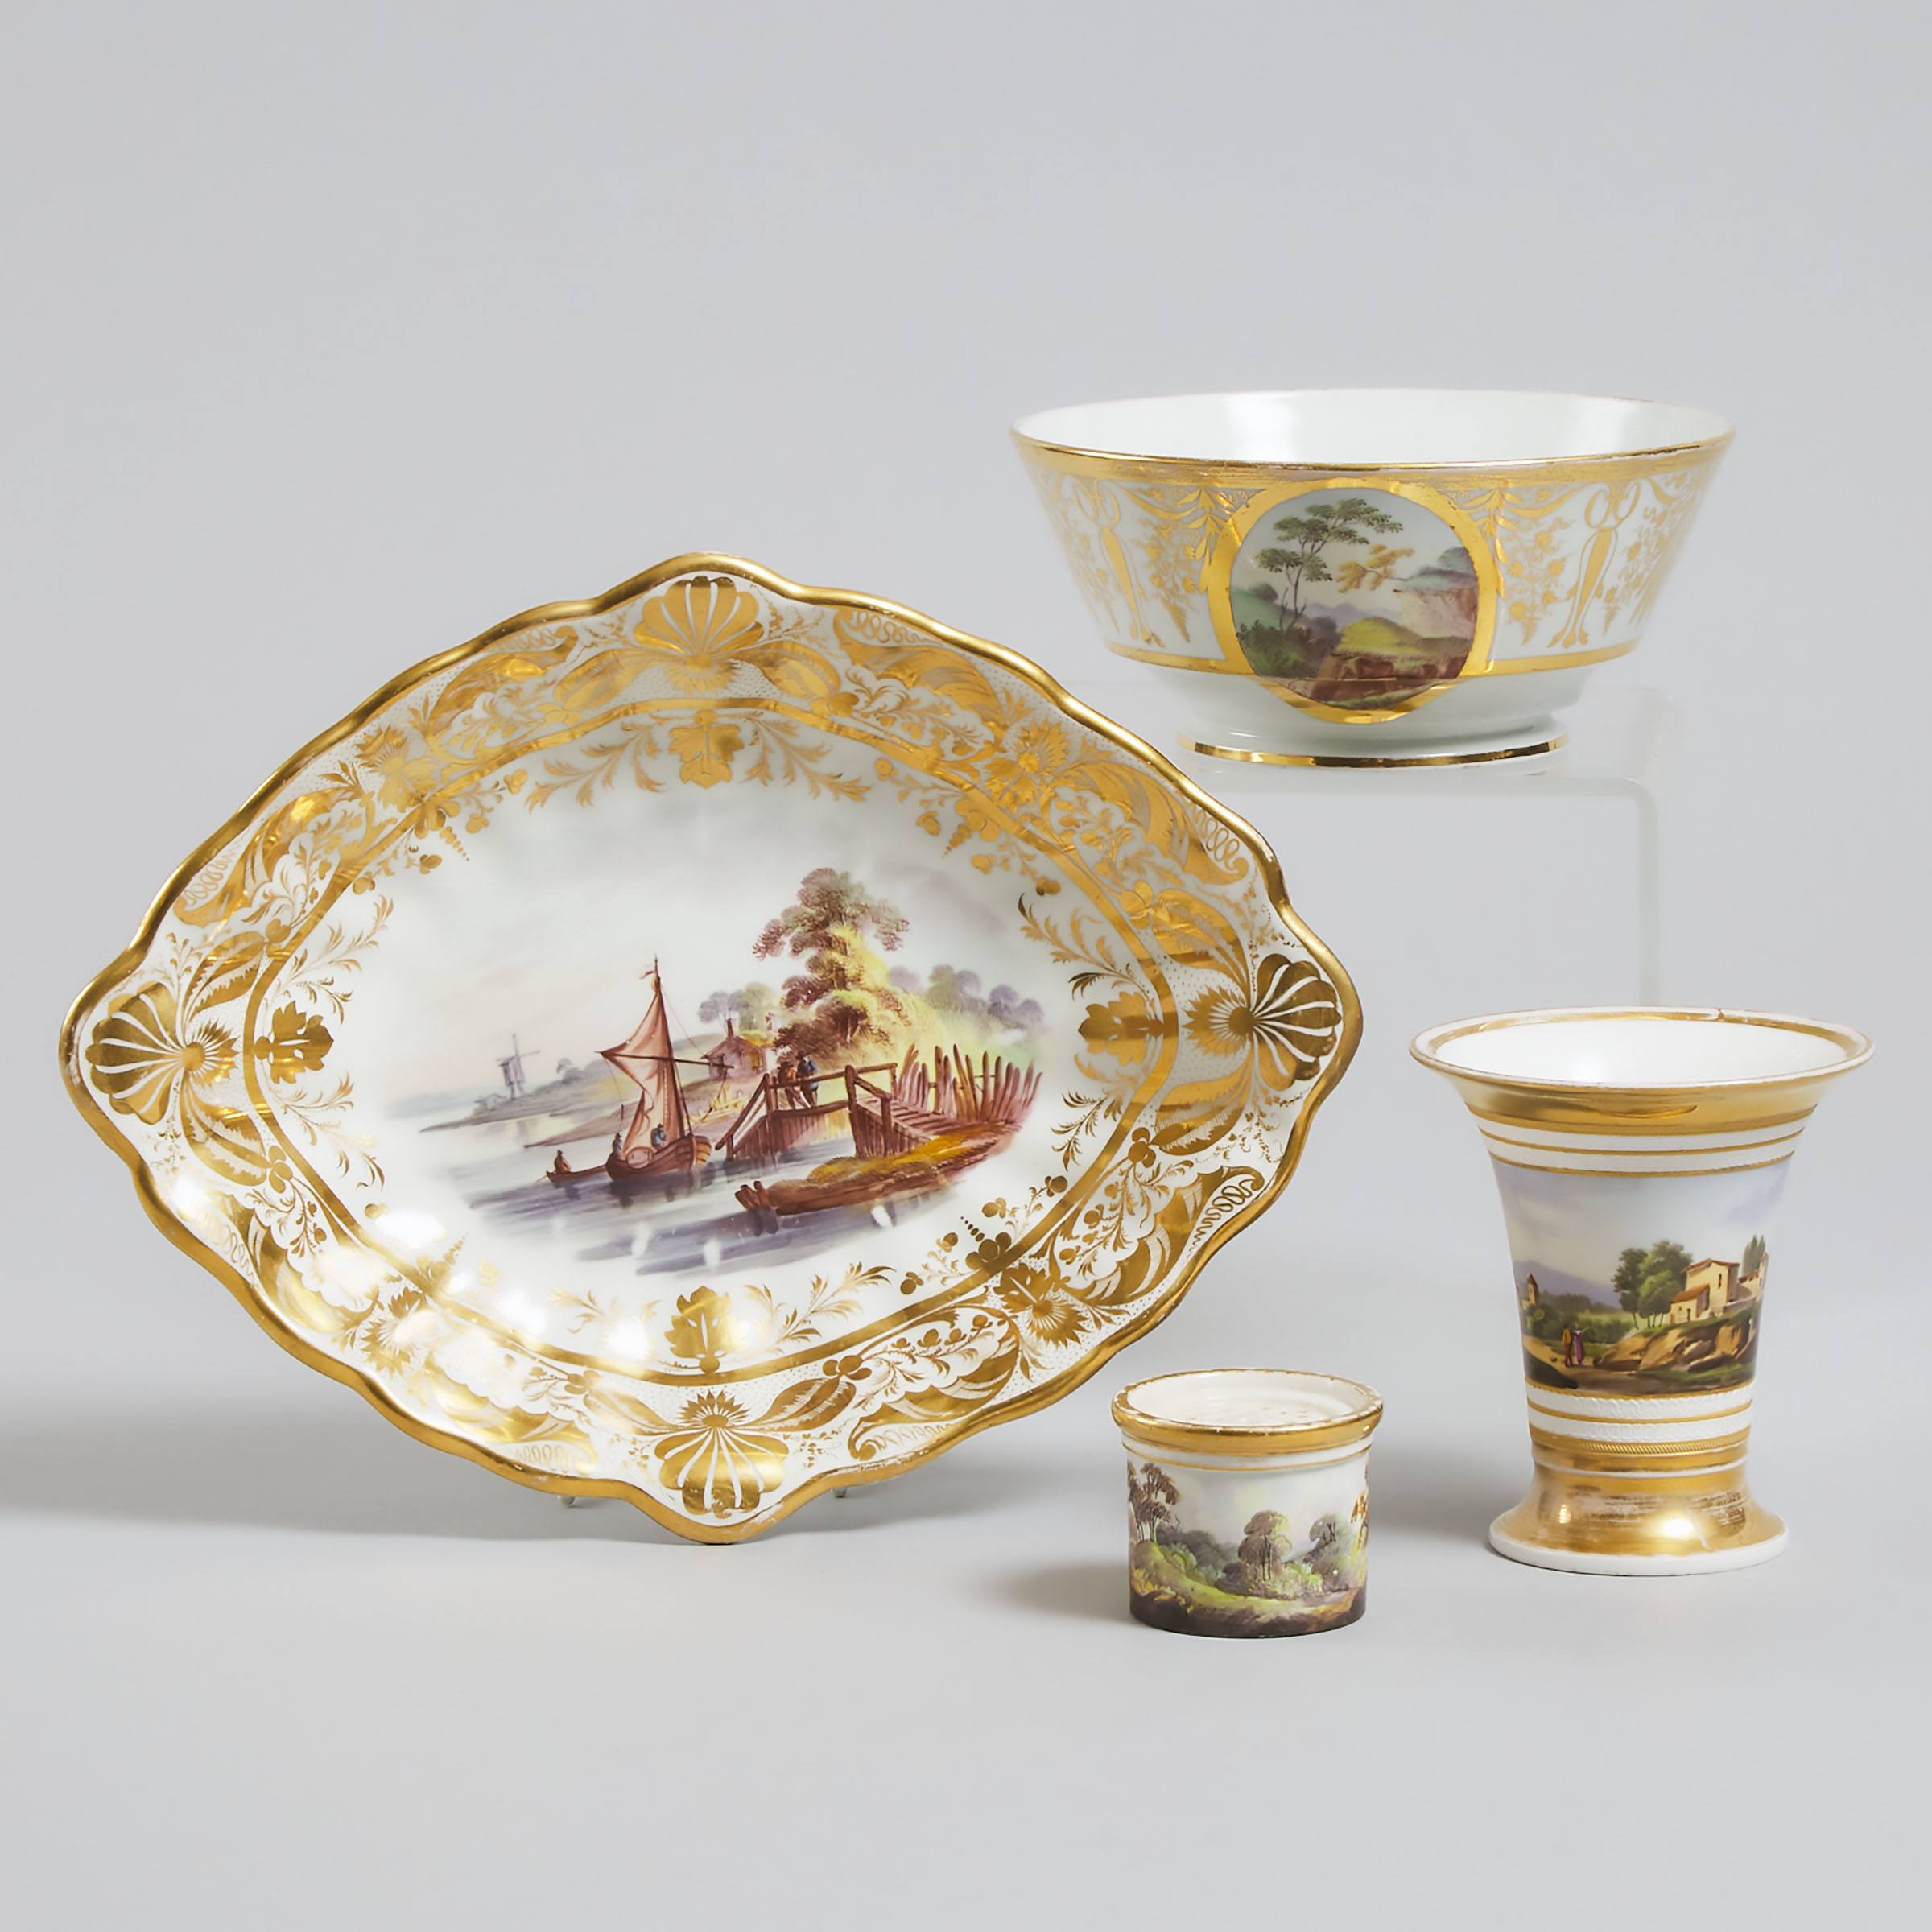 Derby Topographical Oval Dish, Waste Bowl, Pounce Pot and a French Porcelain Spill Vase, early 19th century